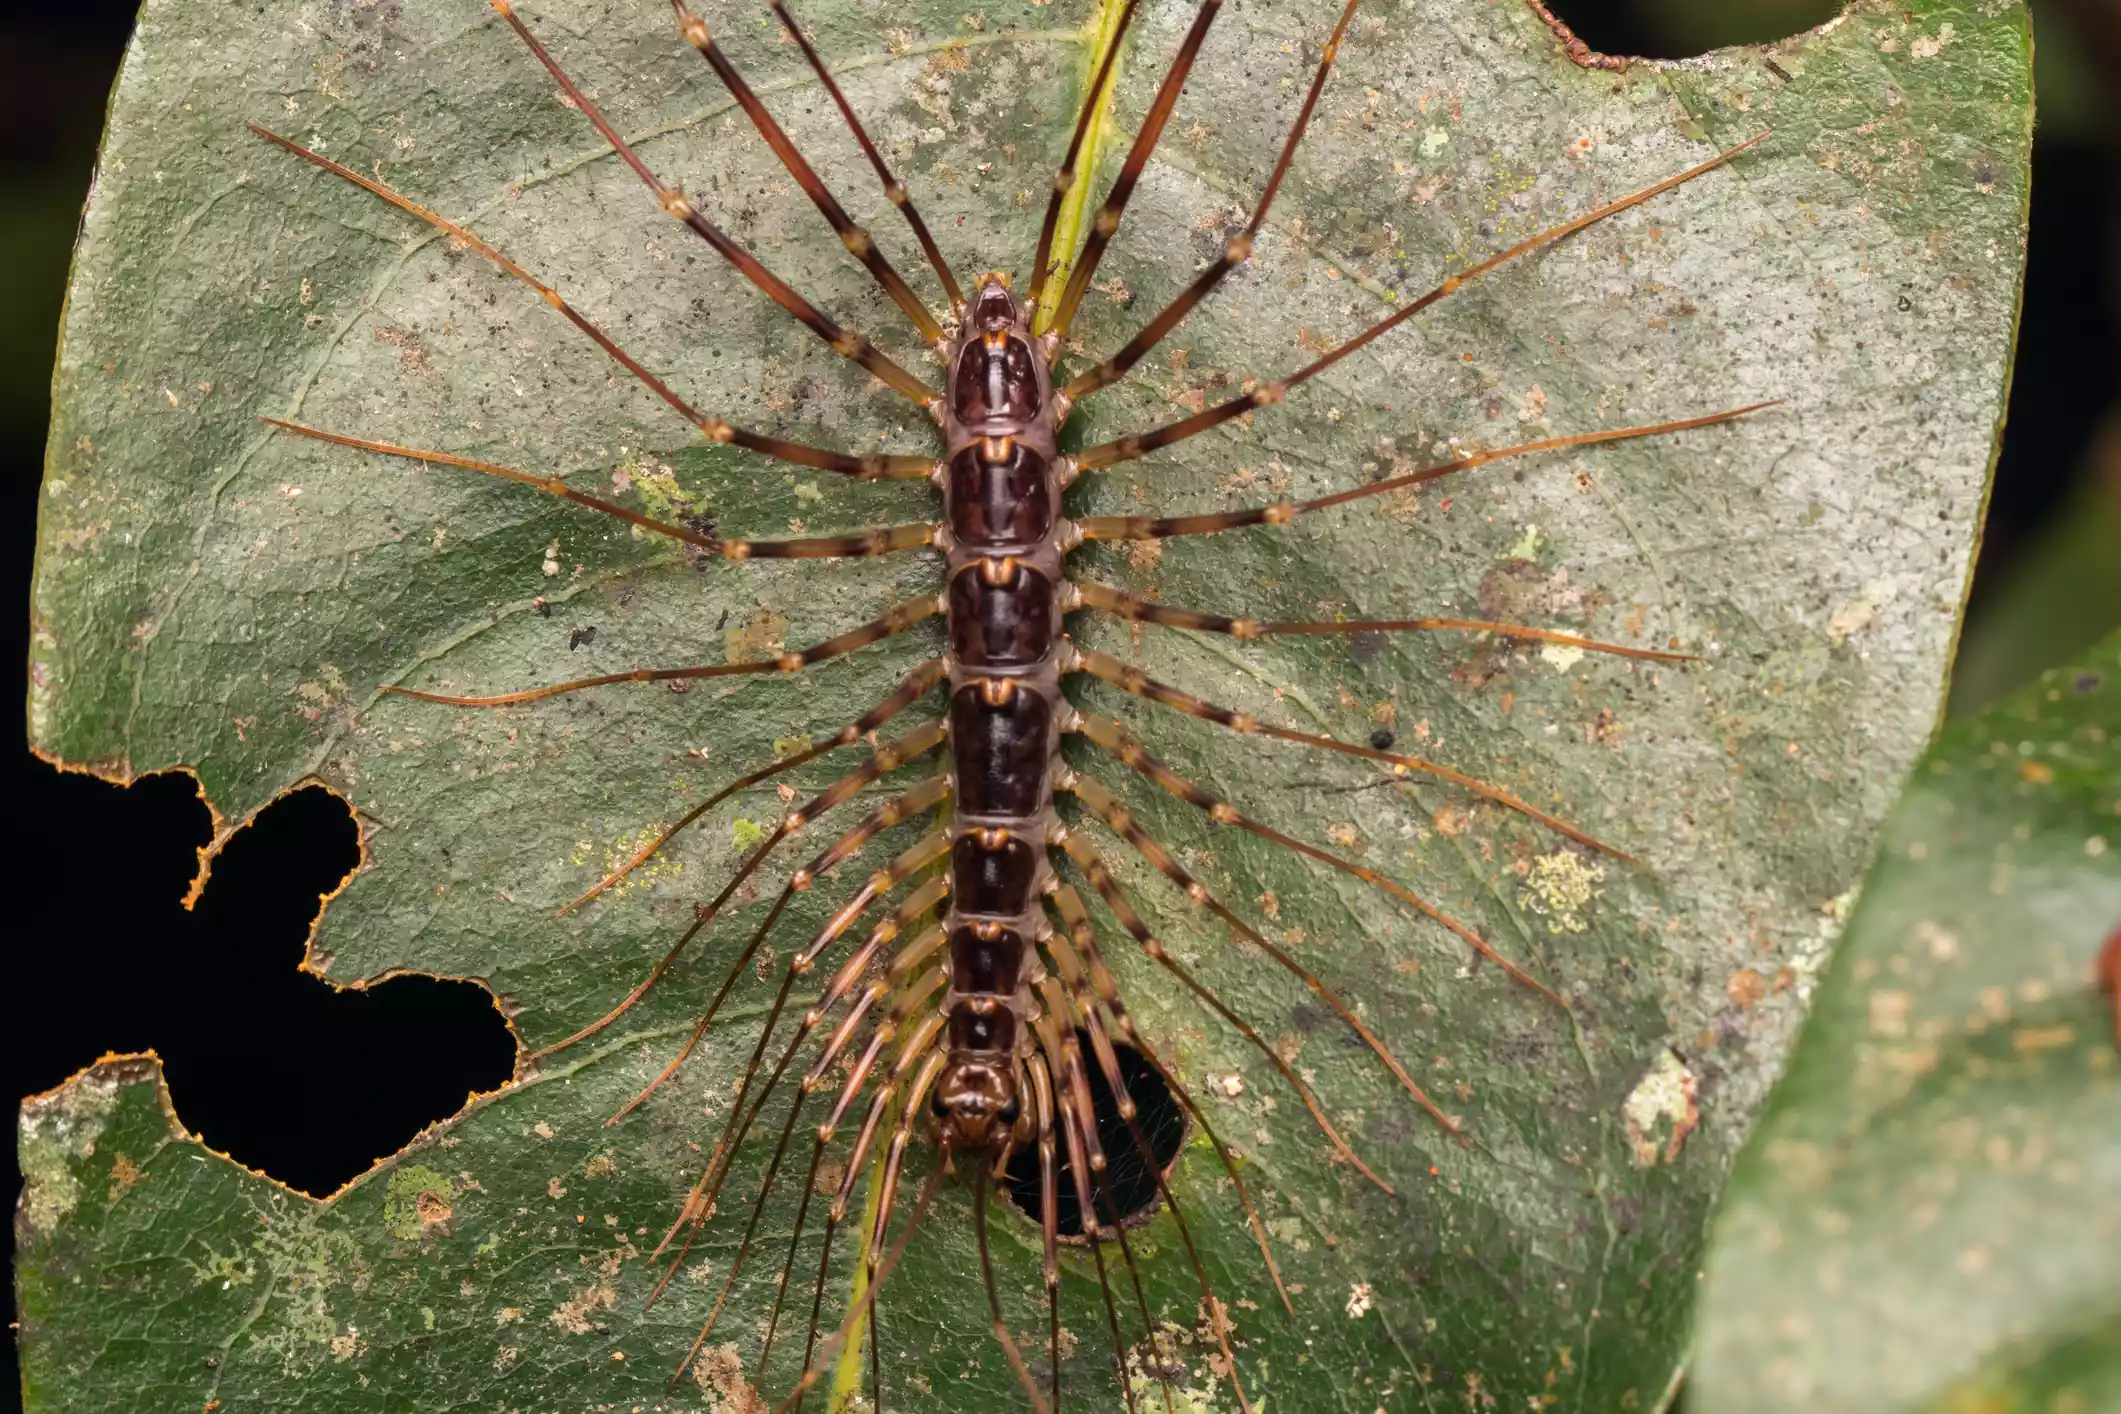 A centipede with long legs on a green leaf